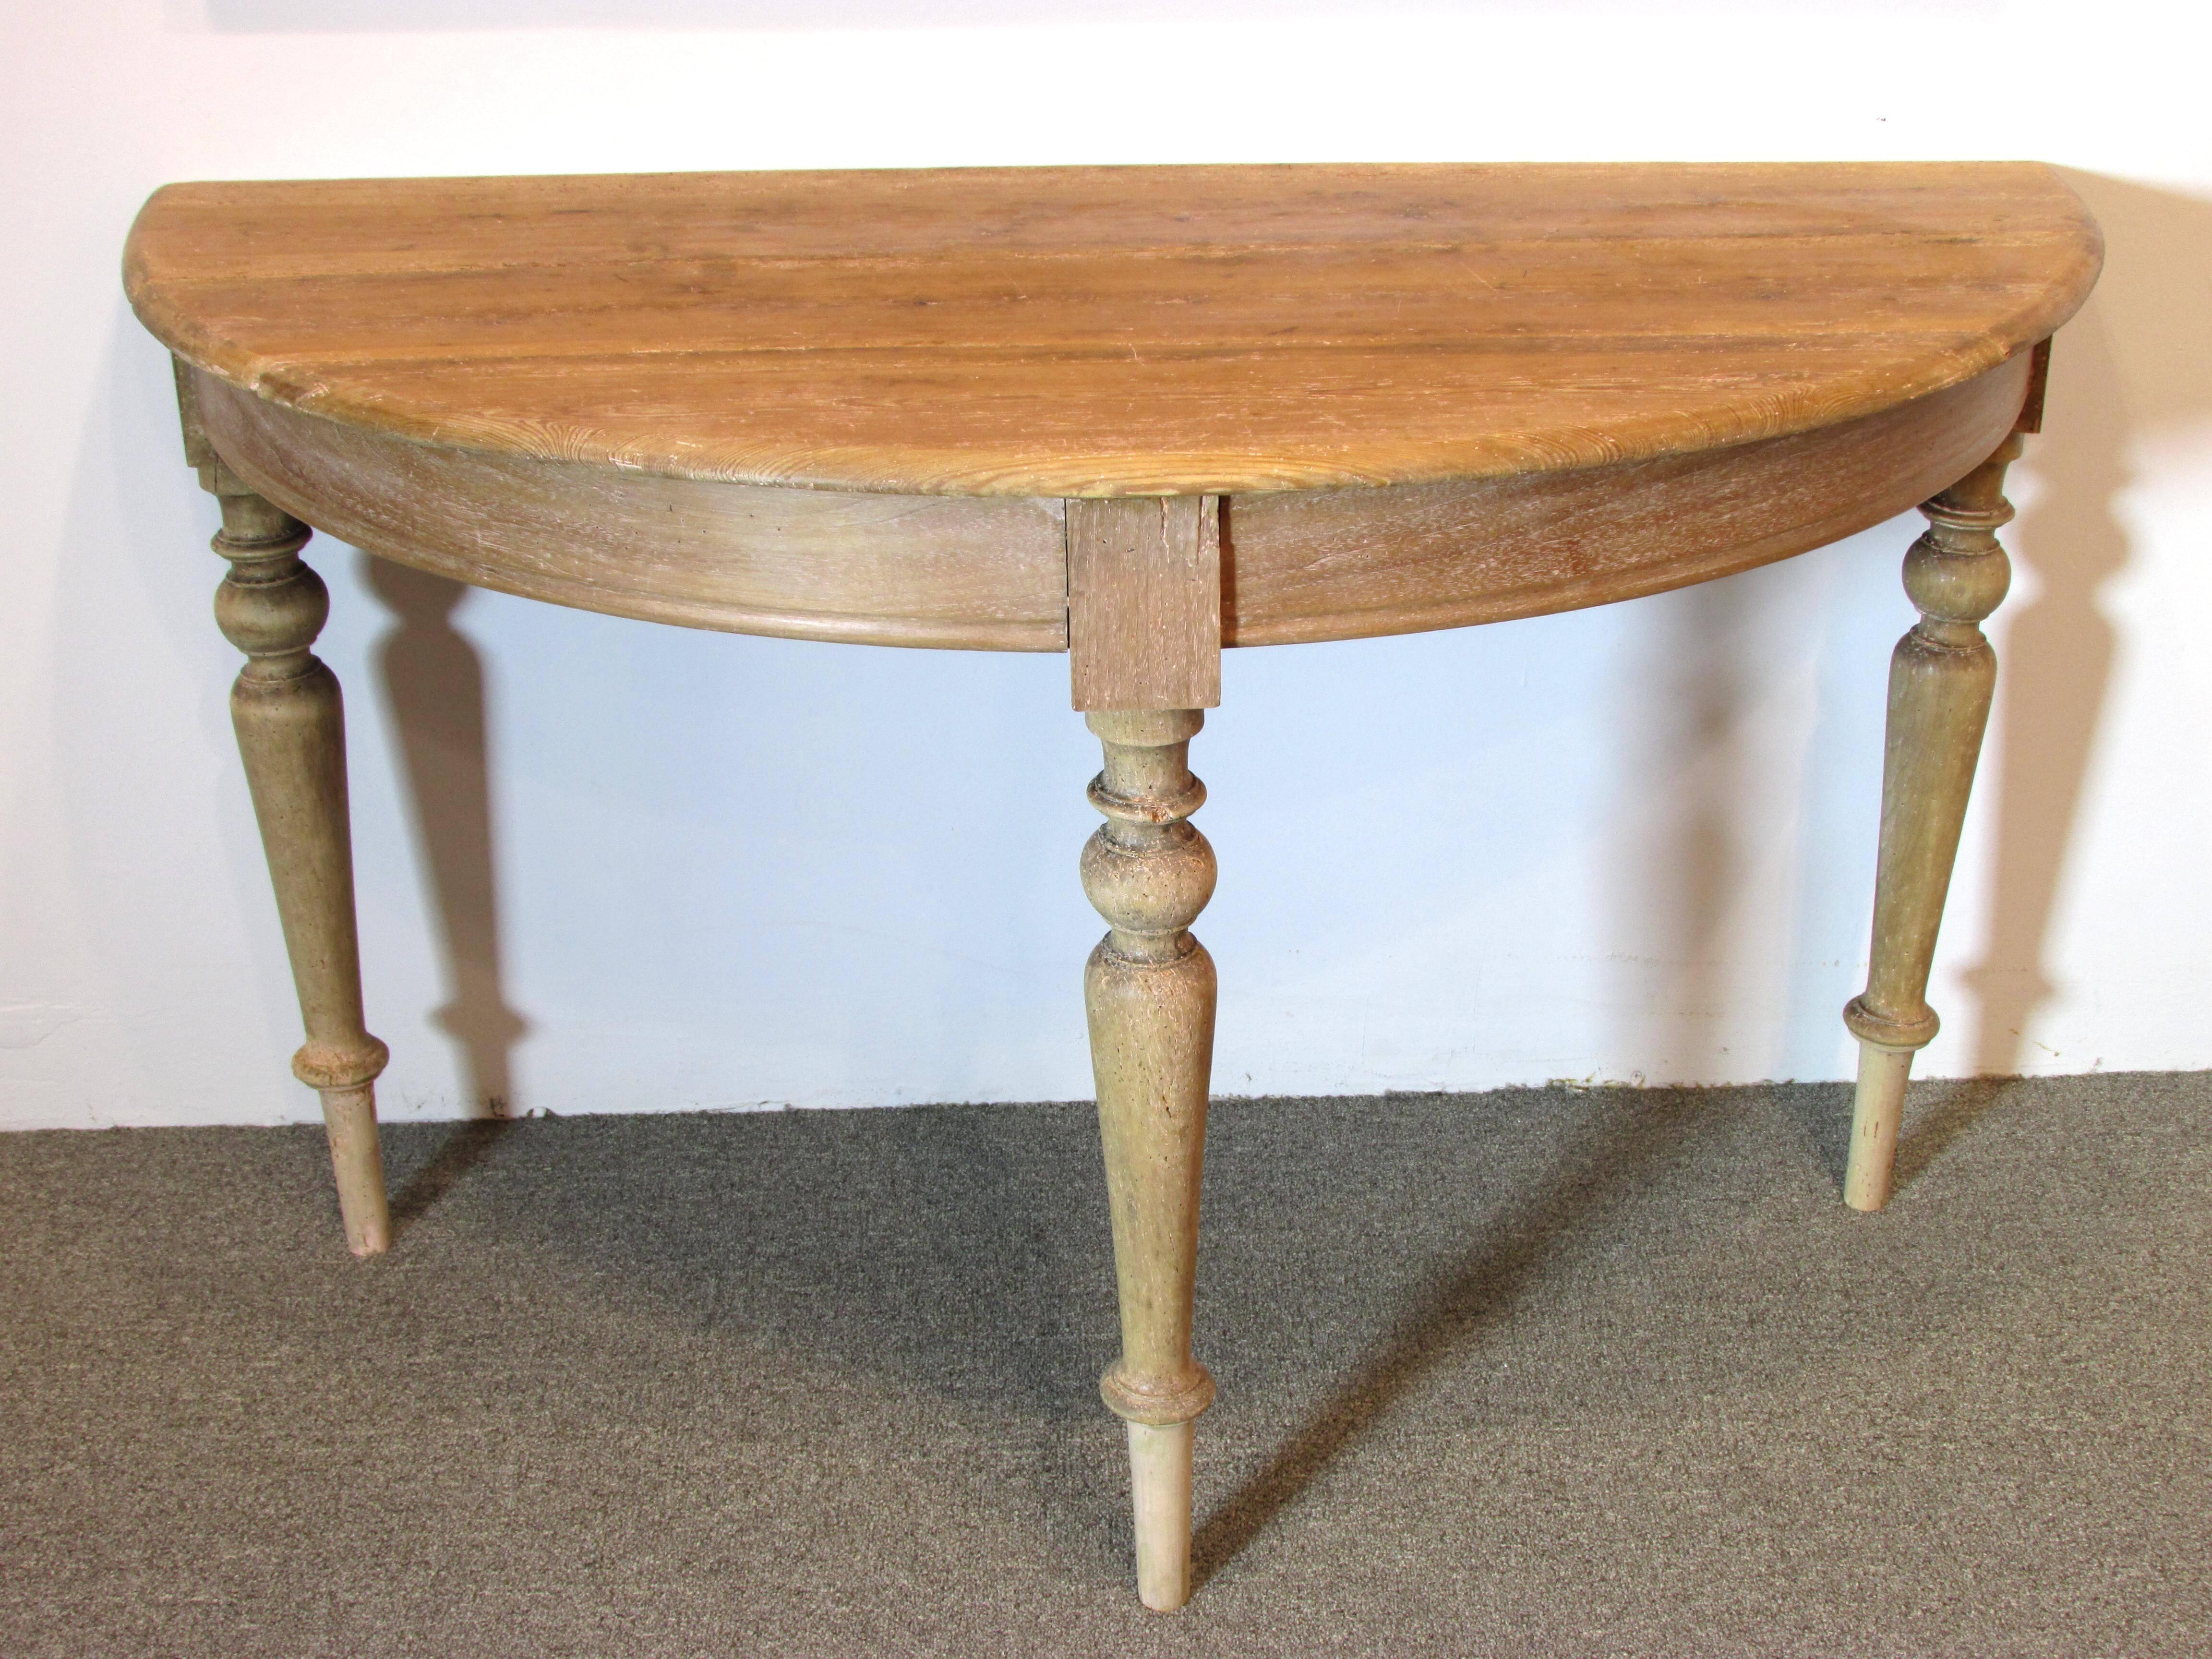 Pair of Southern American demilune tables that can be joined together for a round table scraped yellow pine top with mixed wood turned wood legs and base.